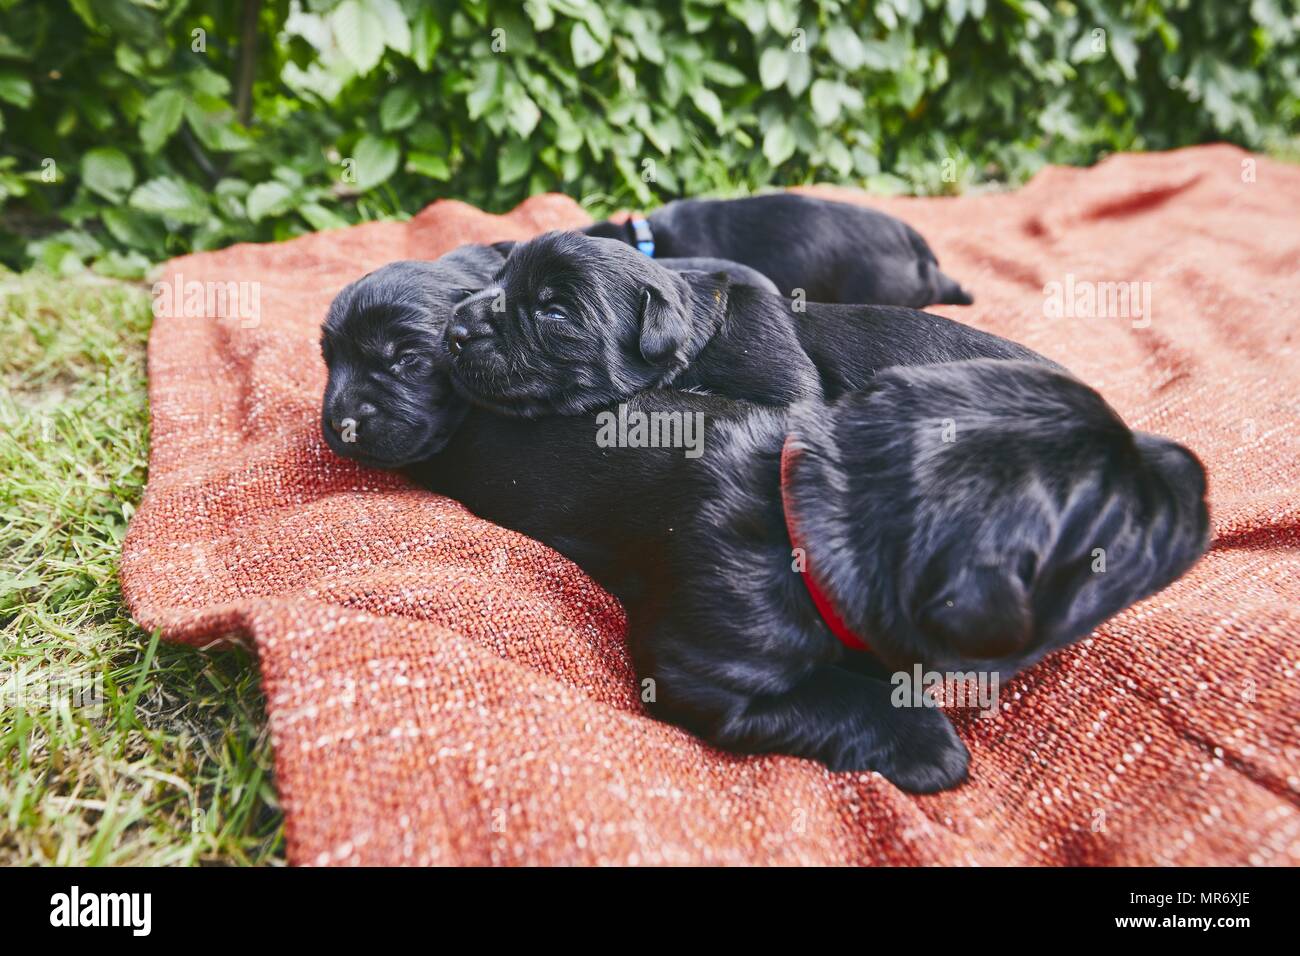 Newborns of dog (10 days old). Puppies siblings of purebred Giant Schnauzer lying on blanket. Stock Photo